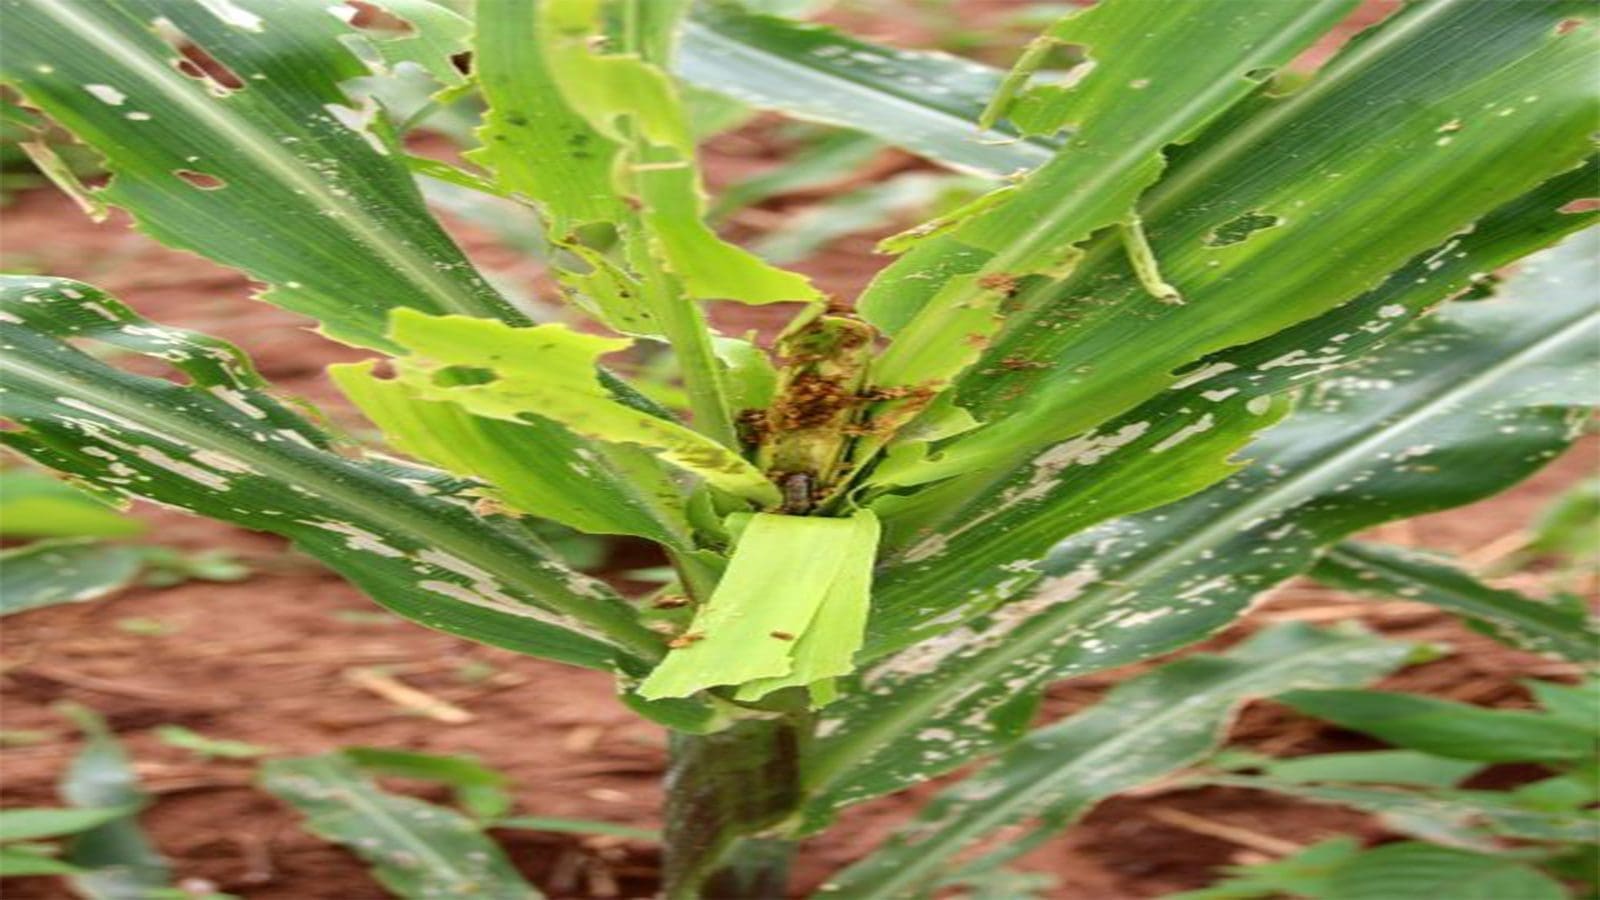 Centre for Agriculture and Biosciences International identifies pests that threaten Kenya’s agriculture